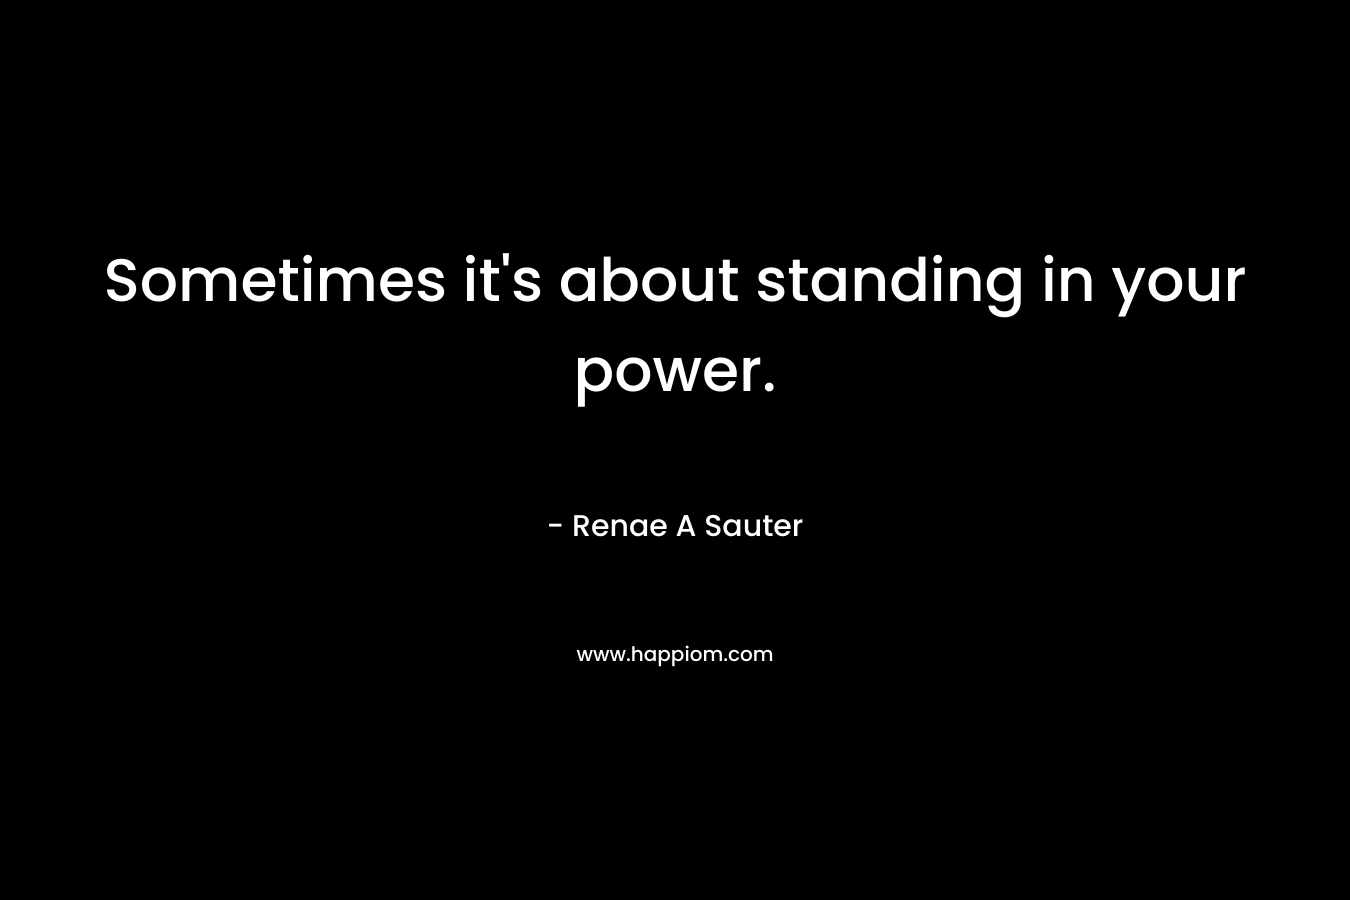 Sometimes it's about standing in your power.